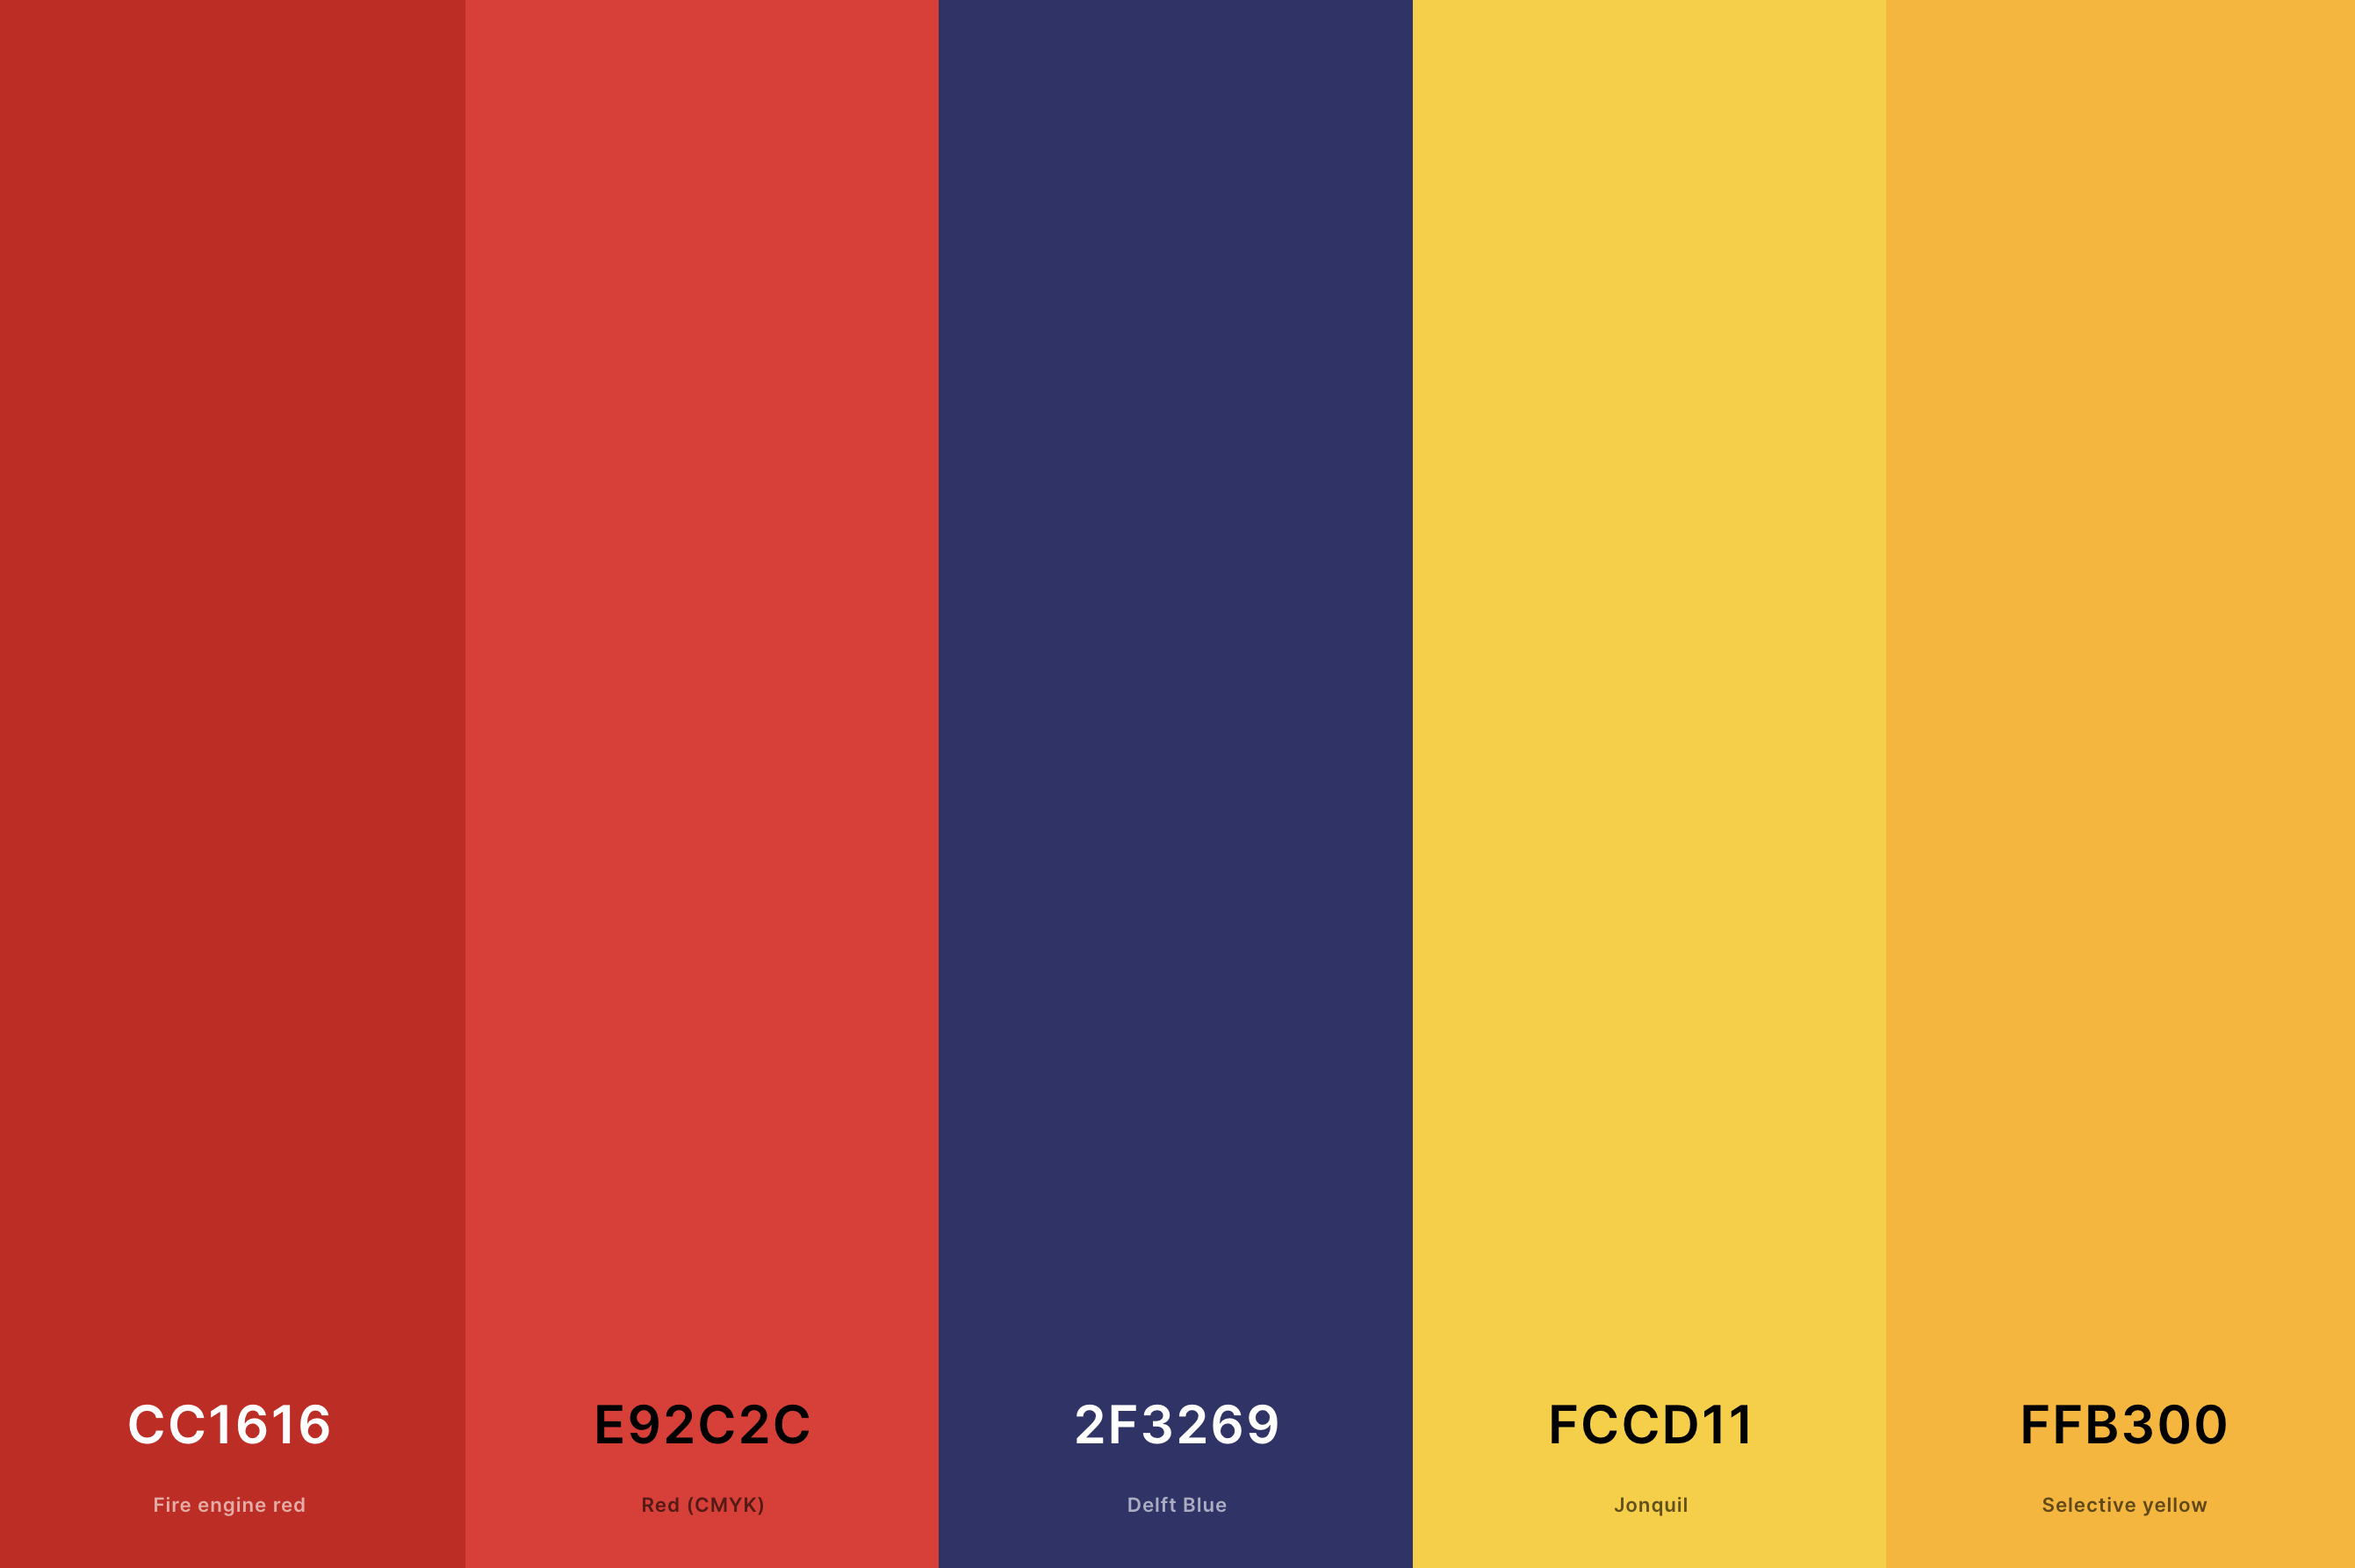 12. Red, Blue And Yellow Color Palette Color Palette with Fire Engine Red (Hex #CC1616) + Red (Cmyk) (Hex #E92C2C) + Delft Blue (Hex #2F3269) + Jonquil (Hex #FCCD11) + Selective Yellow (Hex #FFB300) Color Palette with Hex Codes